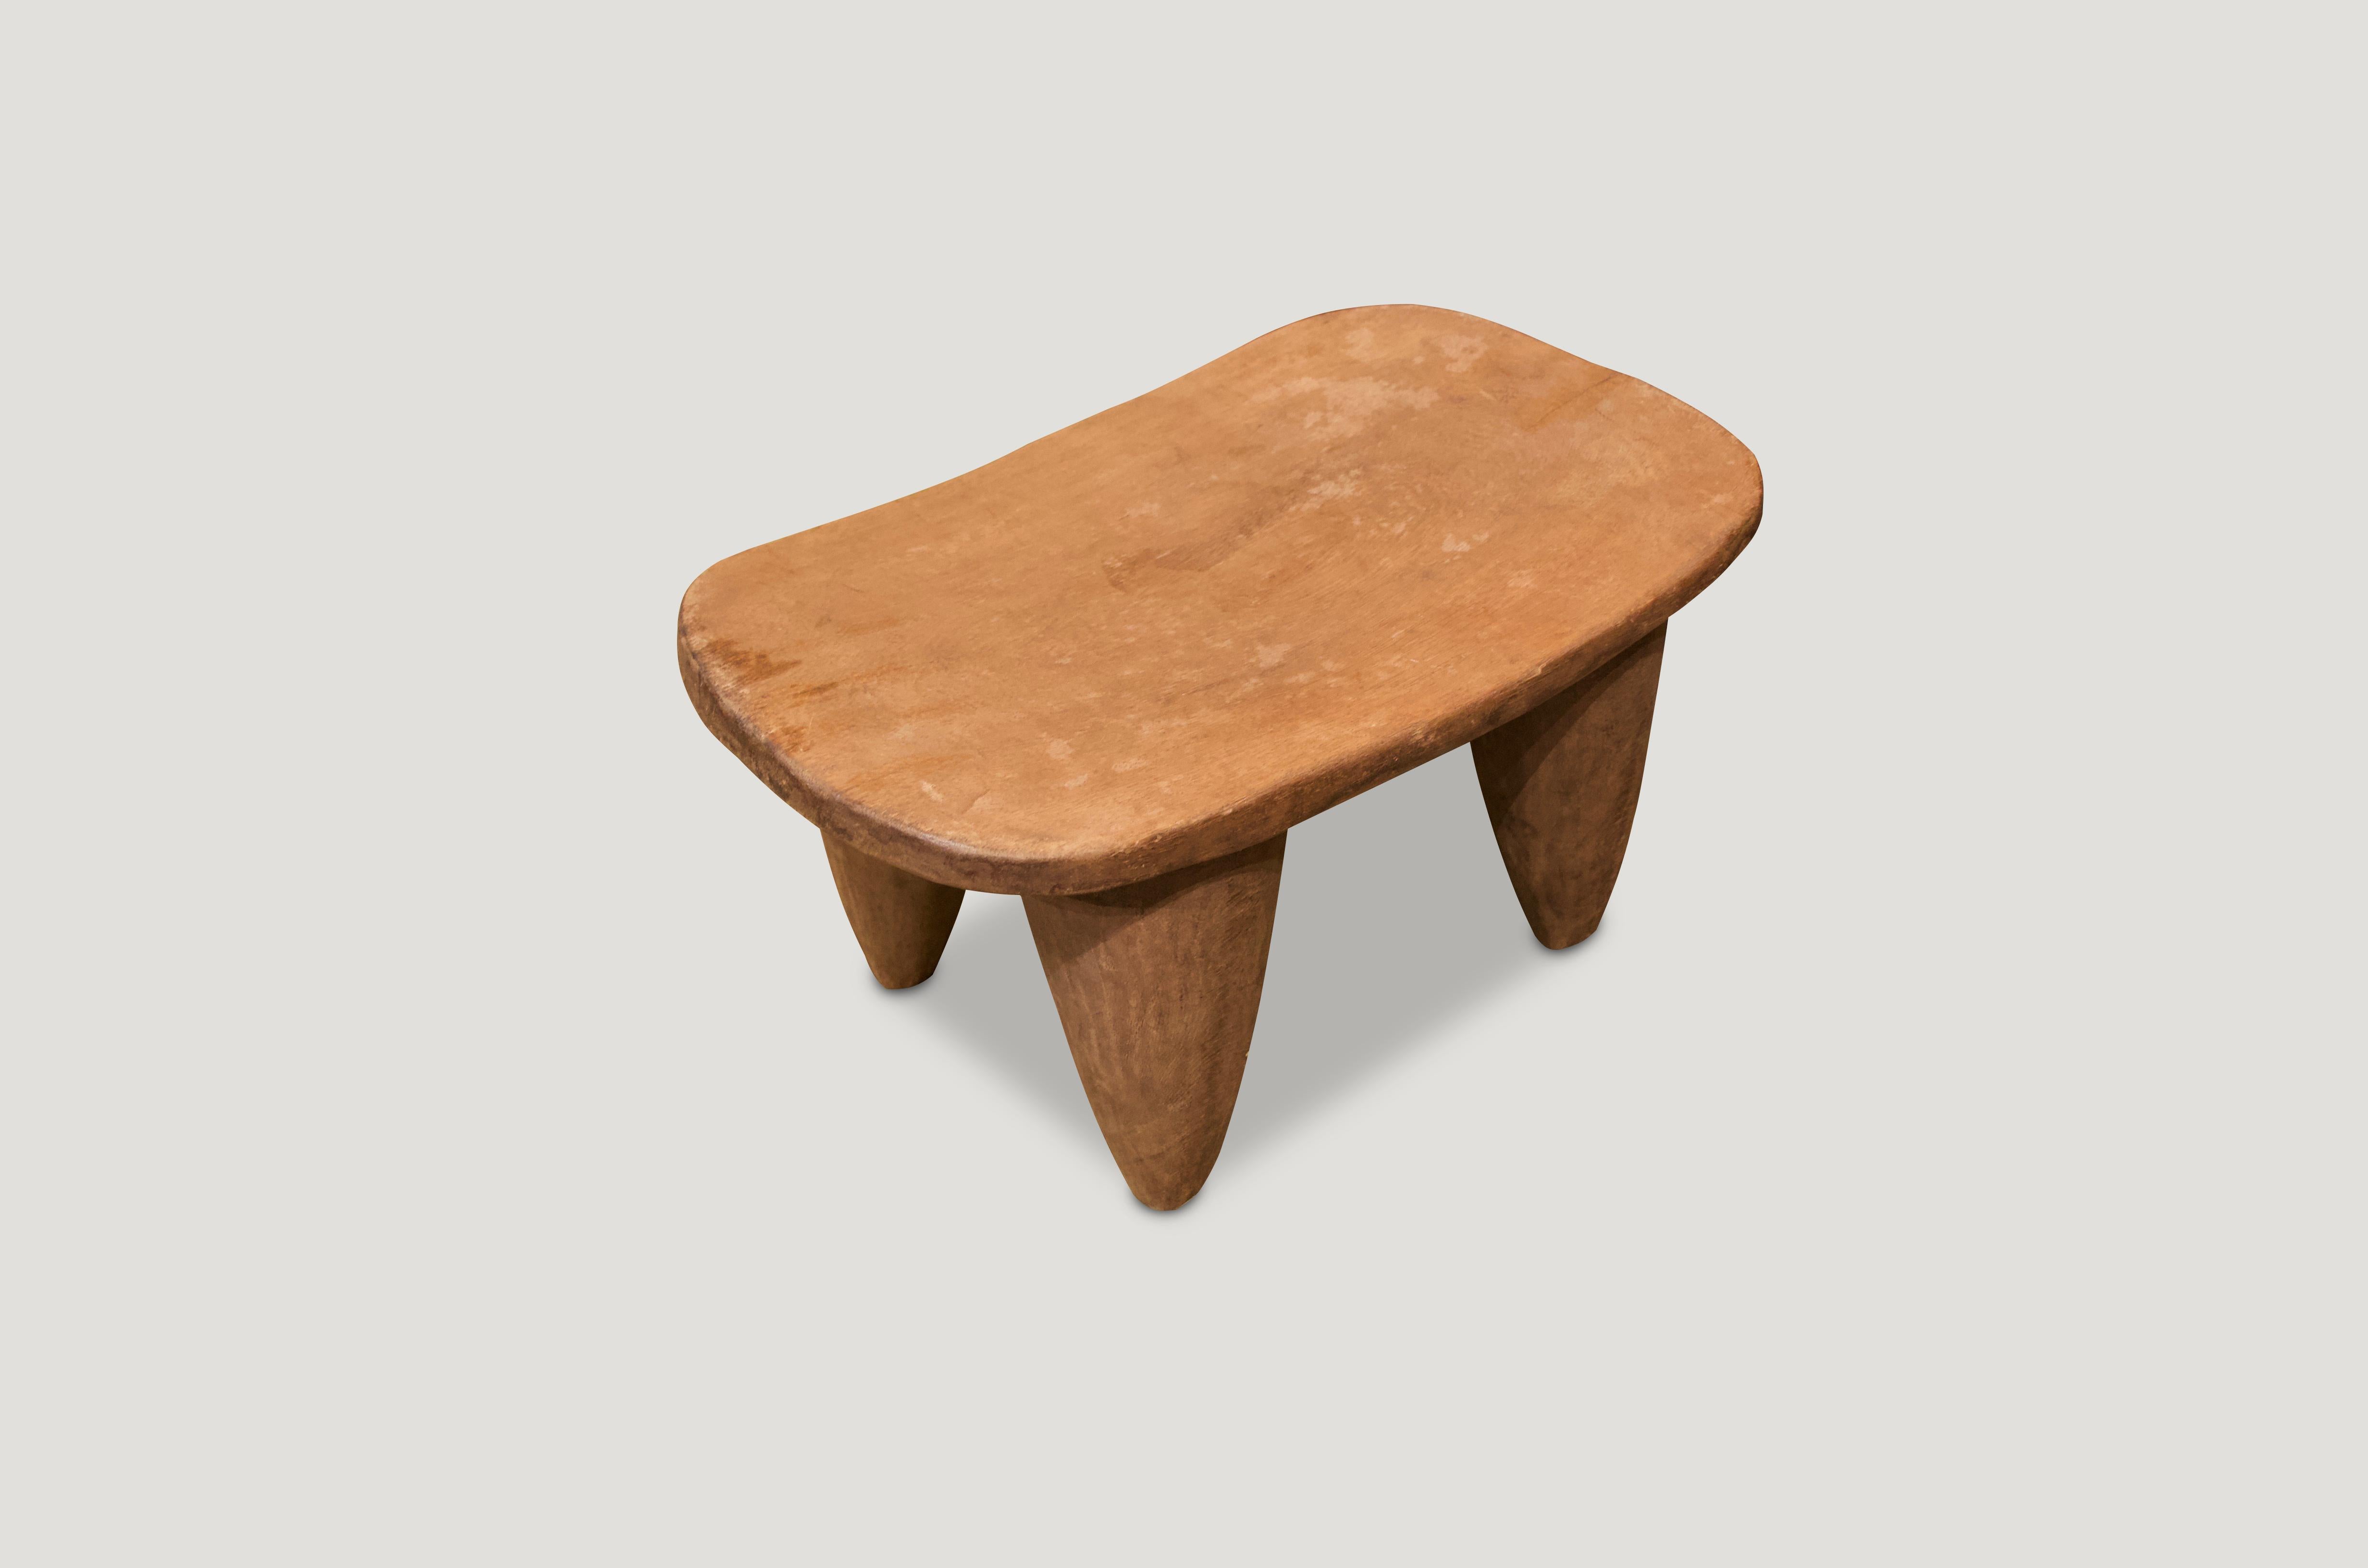 Antique side table or stool carved from a single piece of mahogany wood.

This side table or stool was sourced in the spirit of wabi-sabi, a Japanese philosophy that beauty can be found in imperfection and impermanence. It’s a beauty of things